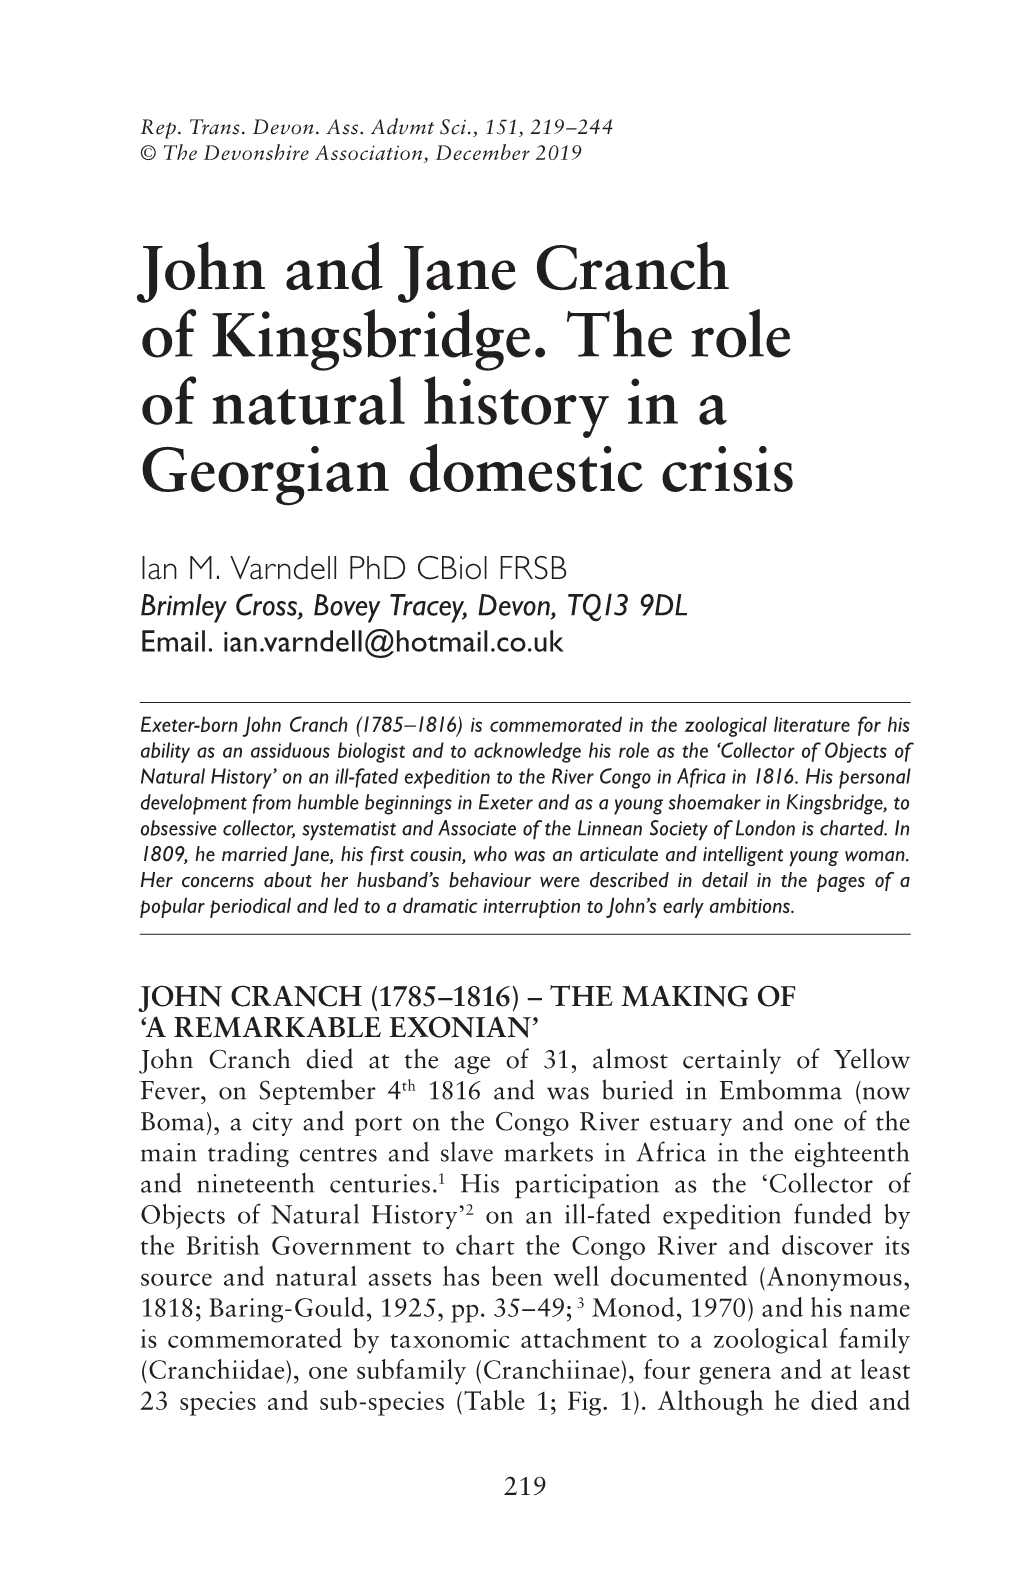 John and Jane Cranch of Kingsbridge. the Role of Natural History in a Georgian Domestic Crisis